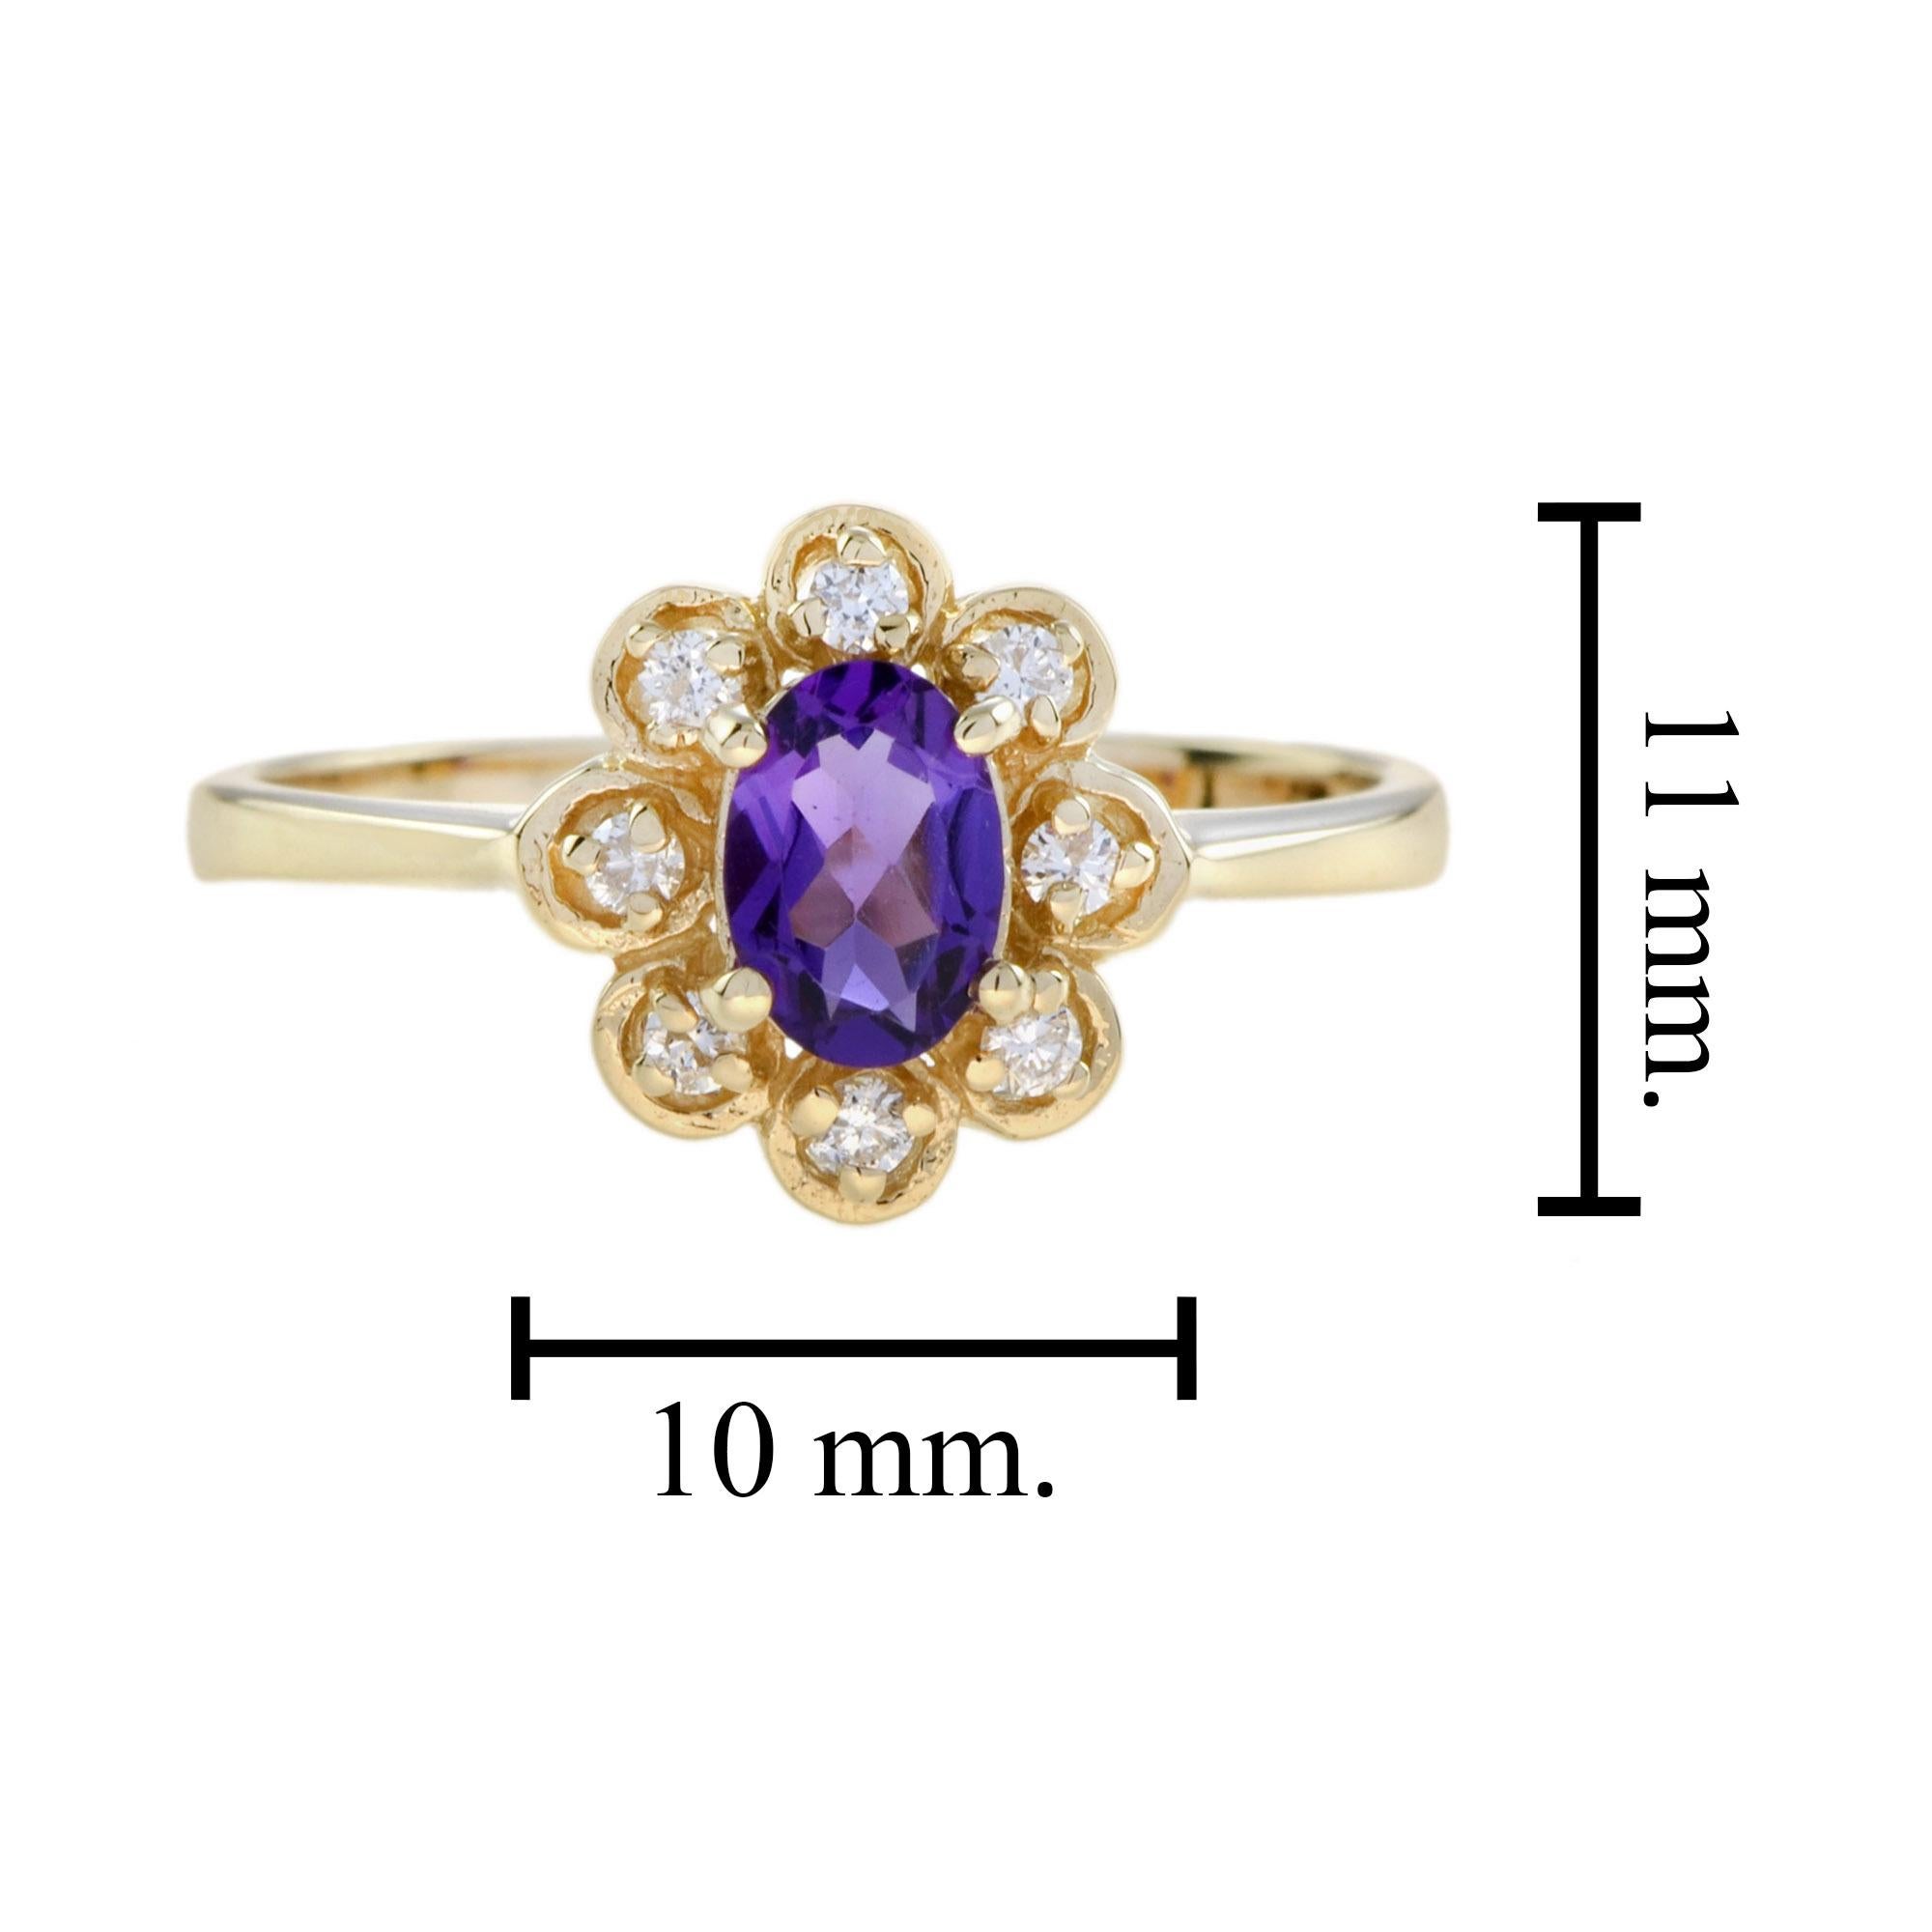 For Sale:  Vintage Style Amethyst and Diamond Halo Ring in 14K Yellow Gold 6